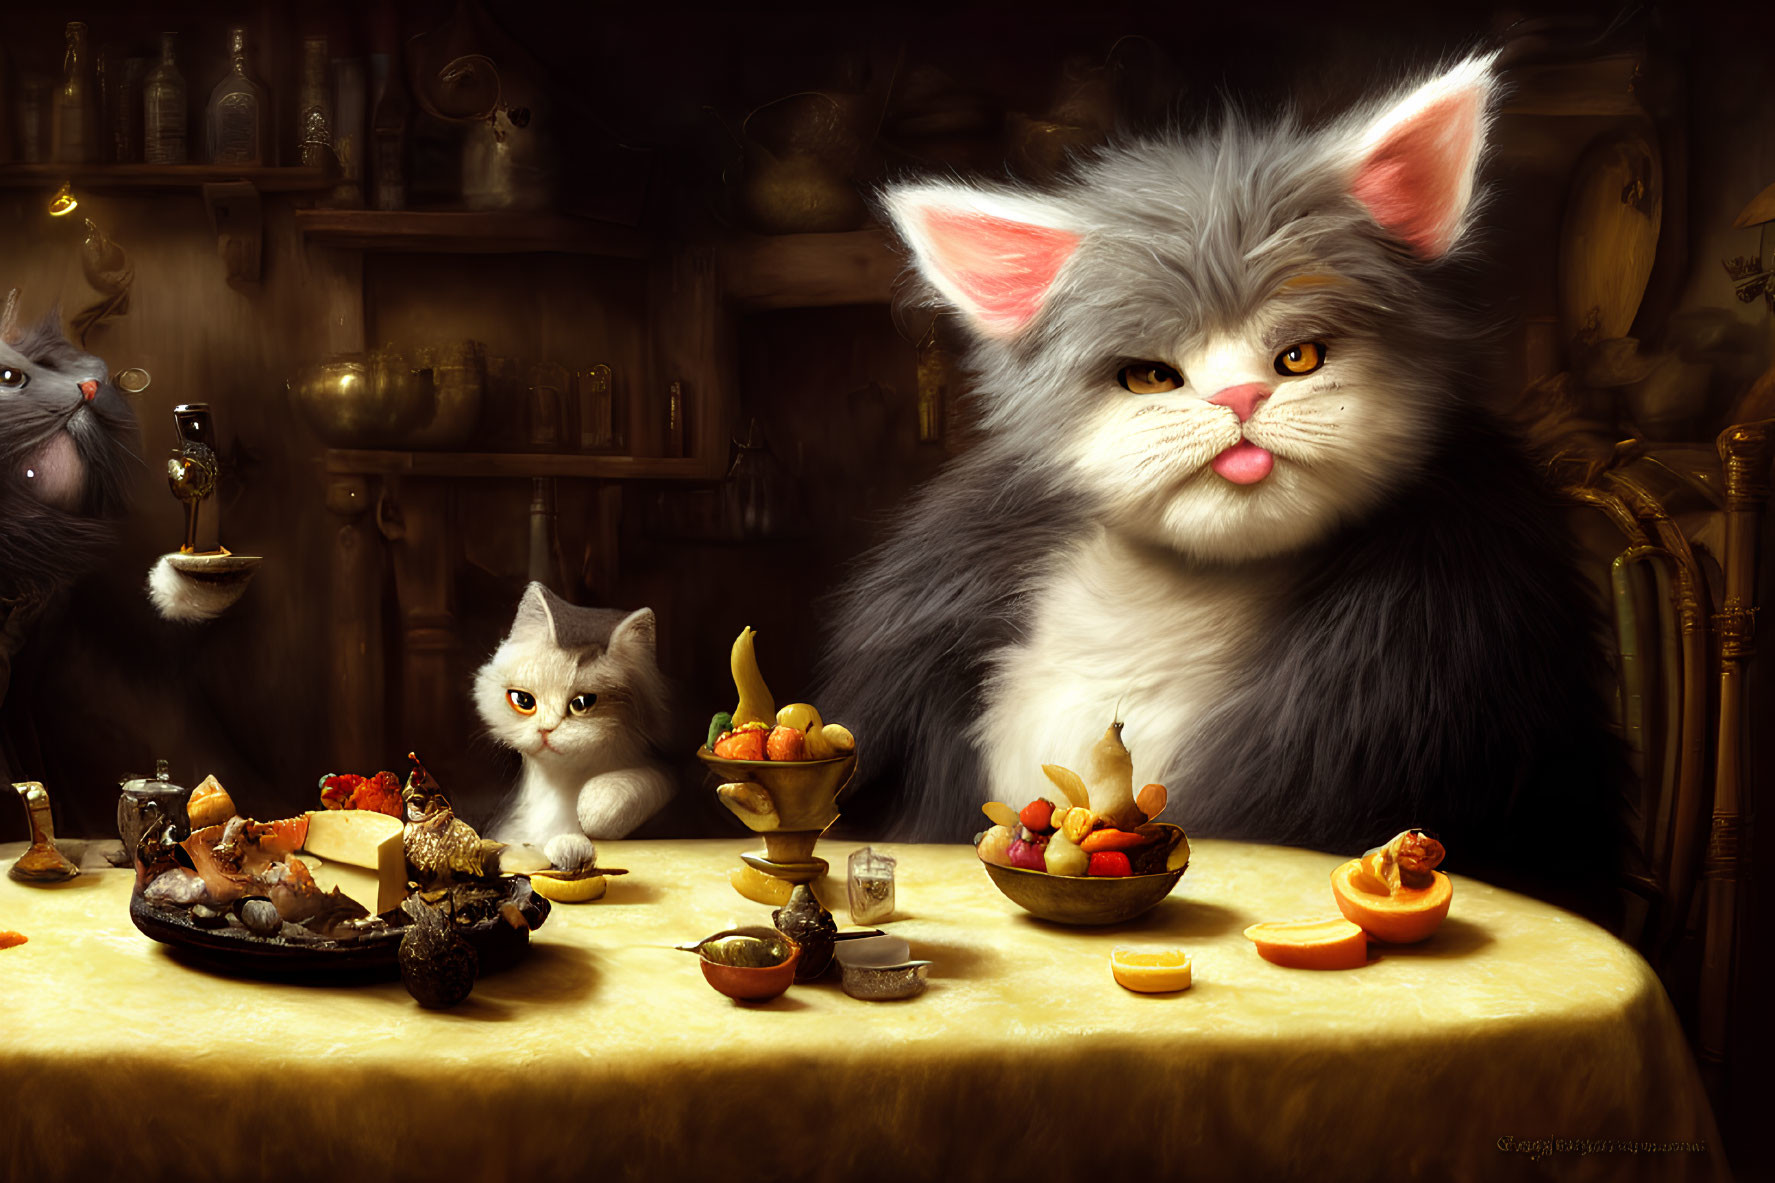 Whimsical painting of fluffy cats at banquet